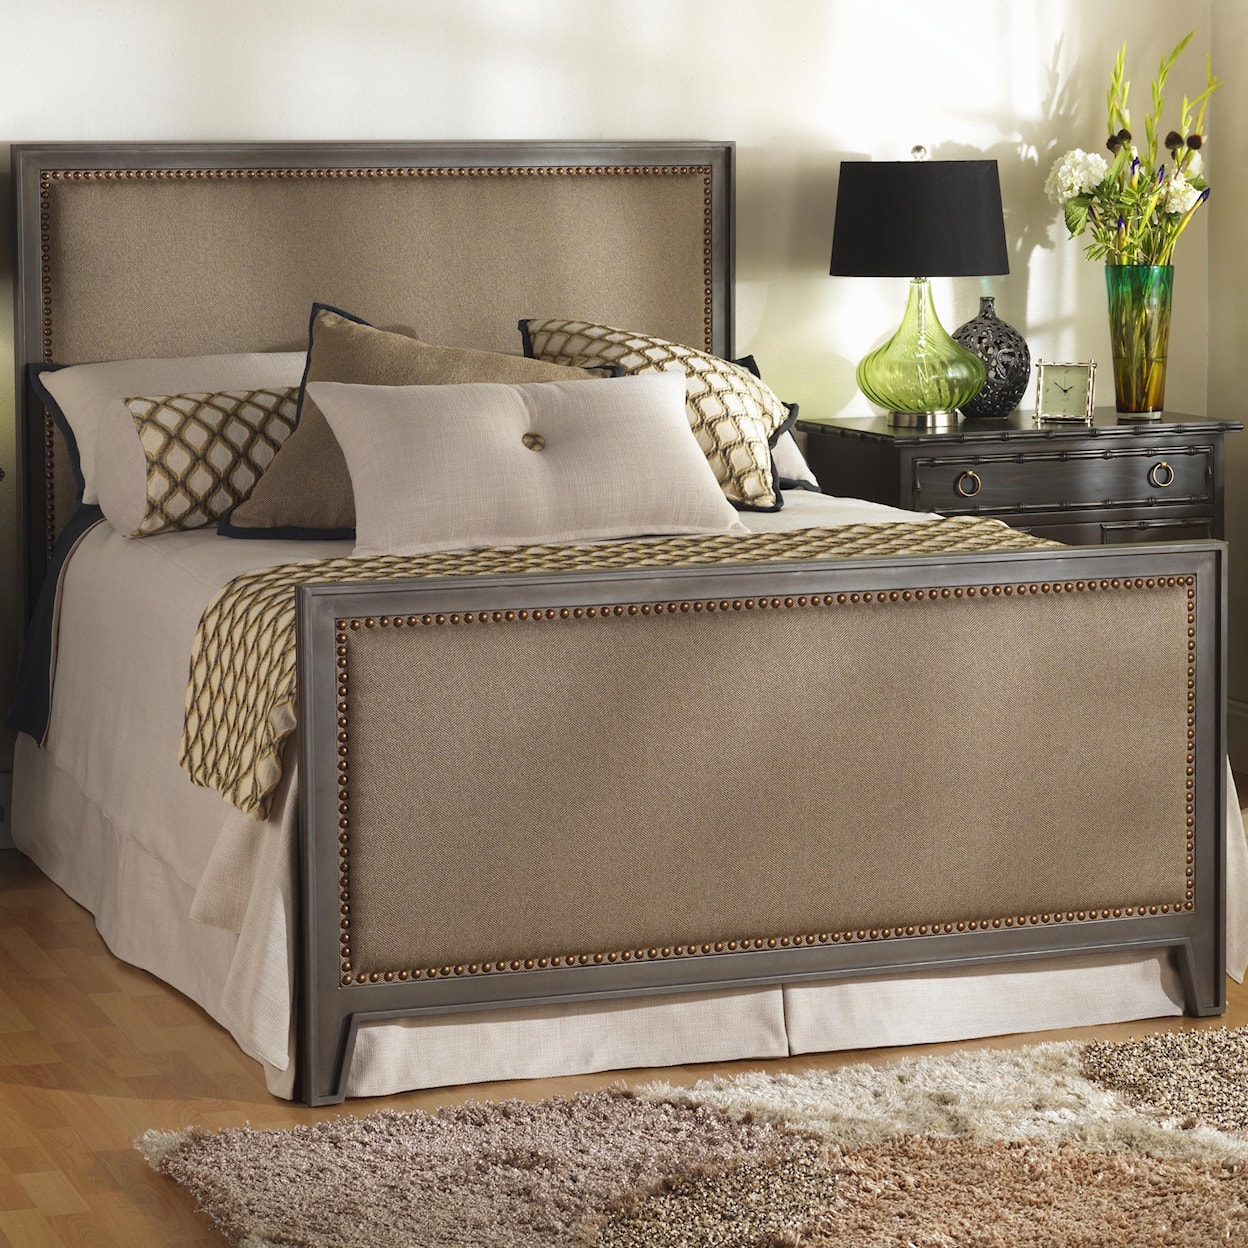 Wesley Allen Iron Beds Full Avery Iron and Upholstered Bed